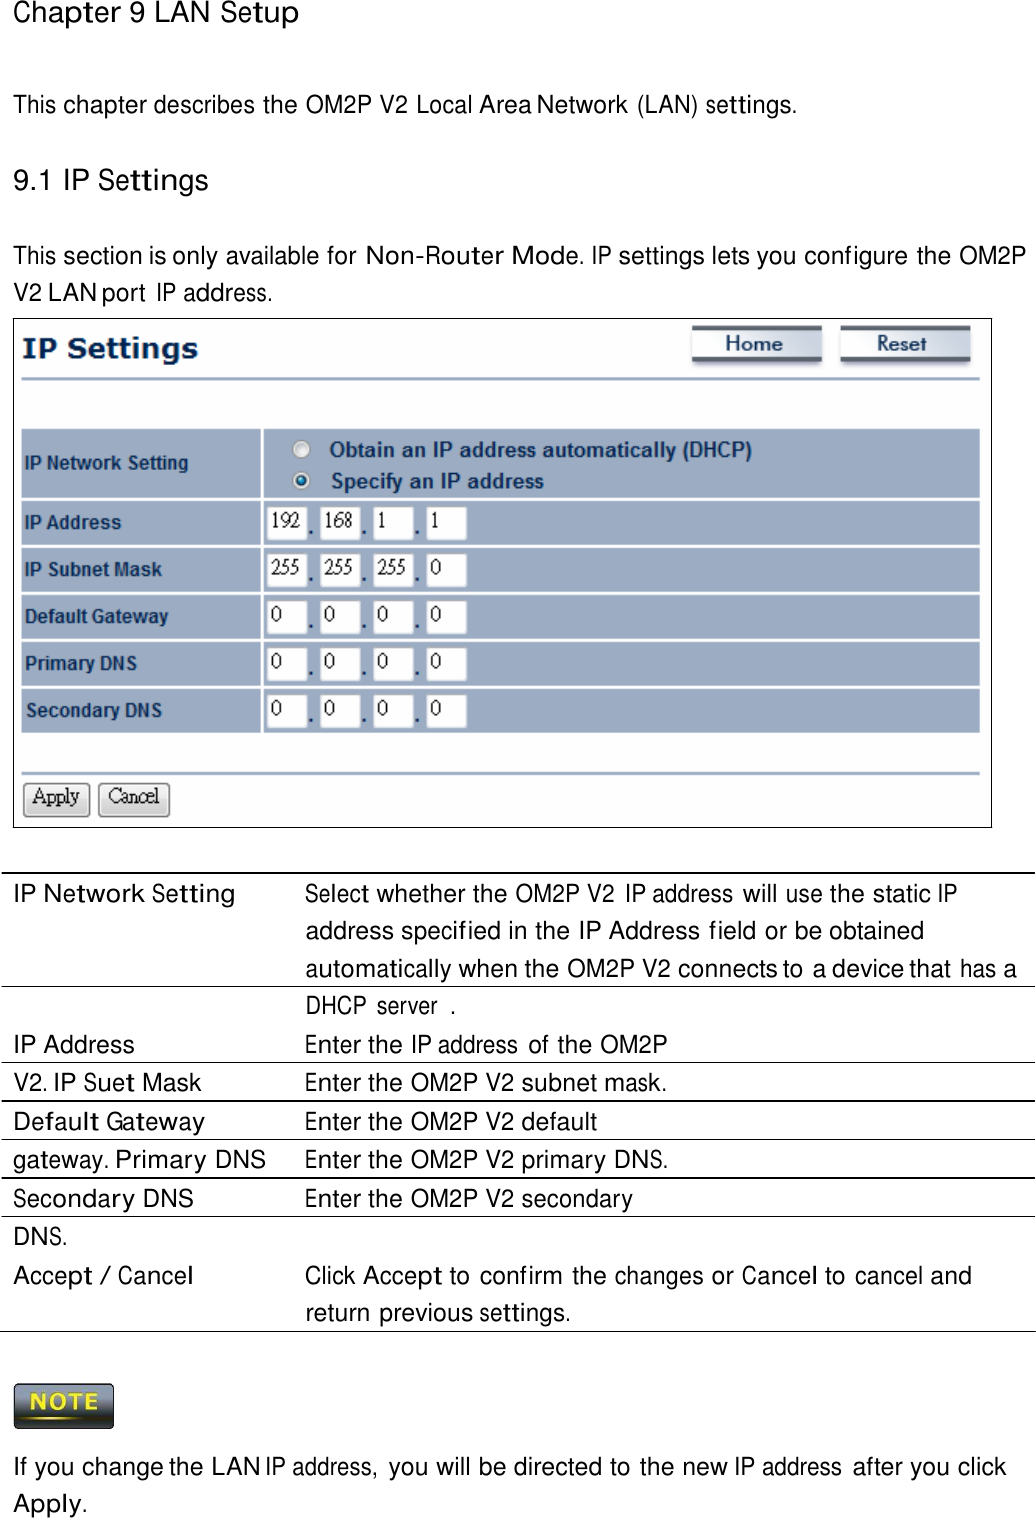 Chapter 9 LAN Setup     This chapter describes the OM2P V2 Local Area Network (LAN) settings.   9.1 IP Settings   This section is only available for Non-Router Mode. IP settings lets you configure the OM2P V2 LAN port IP address.                            IP Network Setting Select whether the OM2P V2  IP address will use the static IP address specif ied in the IP Address field or be obtained automatically when the OM2P V2 connects to a device that has a DHCP  server  . IP Address  Enter the IP address of the OM2P V2. IP Suet Mask  Enter the OM2P V2 subnet mask. Default Gateway Enter the OM2P V2 default gateway. Primary DNS  Enter the OM2P V2 primary DNS. Secondary DNS  Enter the OM2P V2 secondary DNS. Accept / Cancel Click Accept to confirm the changes or Cancel to cancel and return previous settings.      If you change the LAN IP address, you will be directed to the new IP address after you click Apply. 